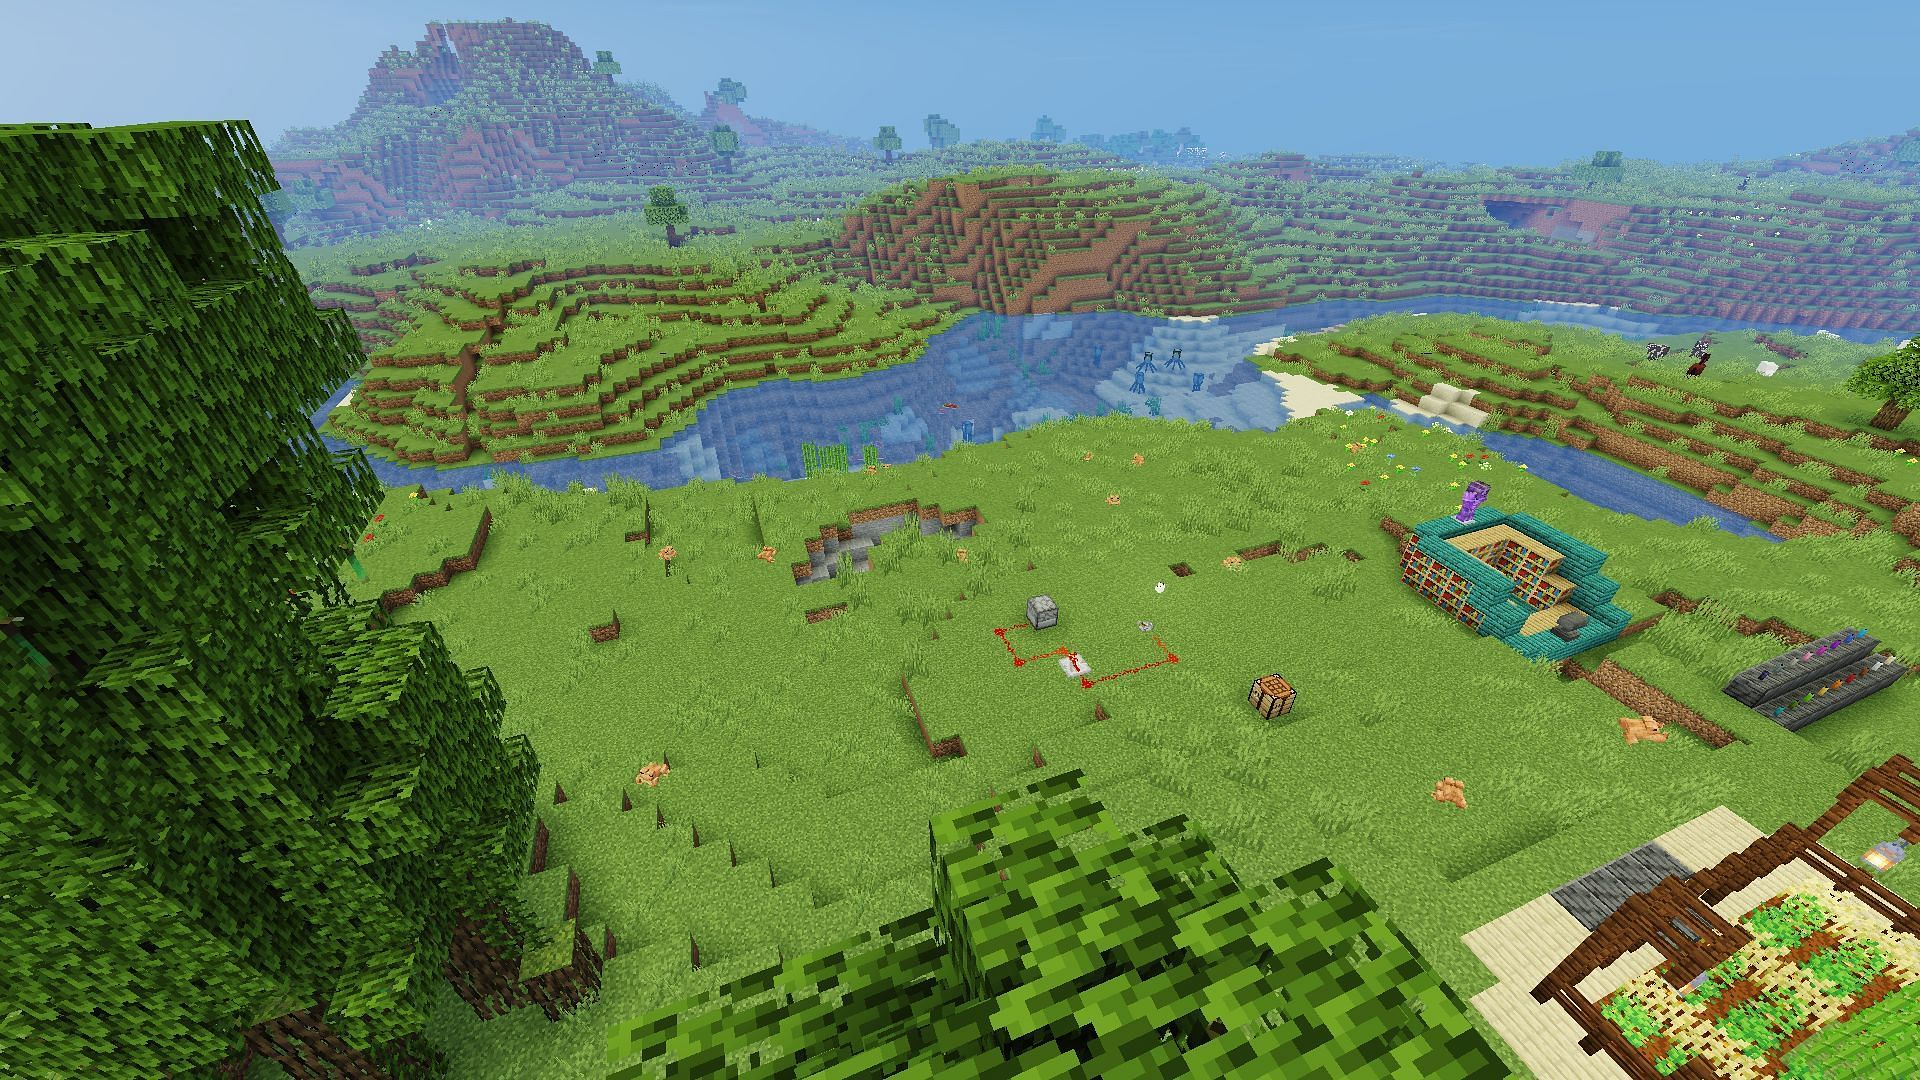 The example area with YoFPS shaders applied (Image via Minecraft)